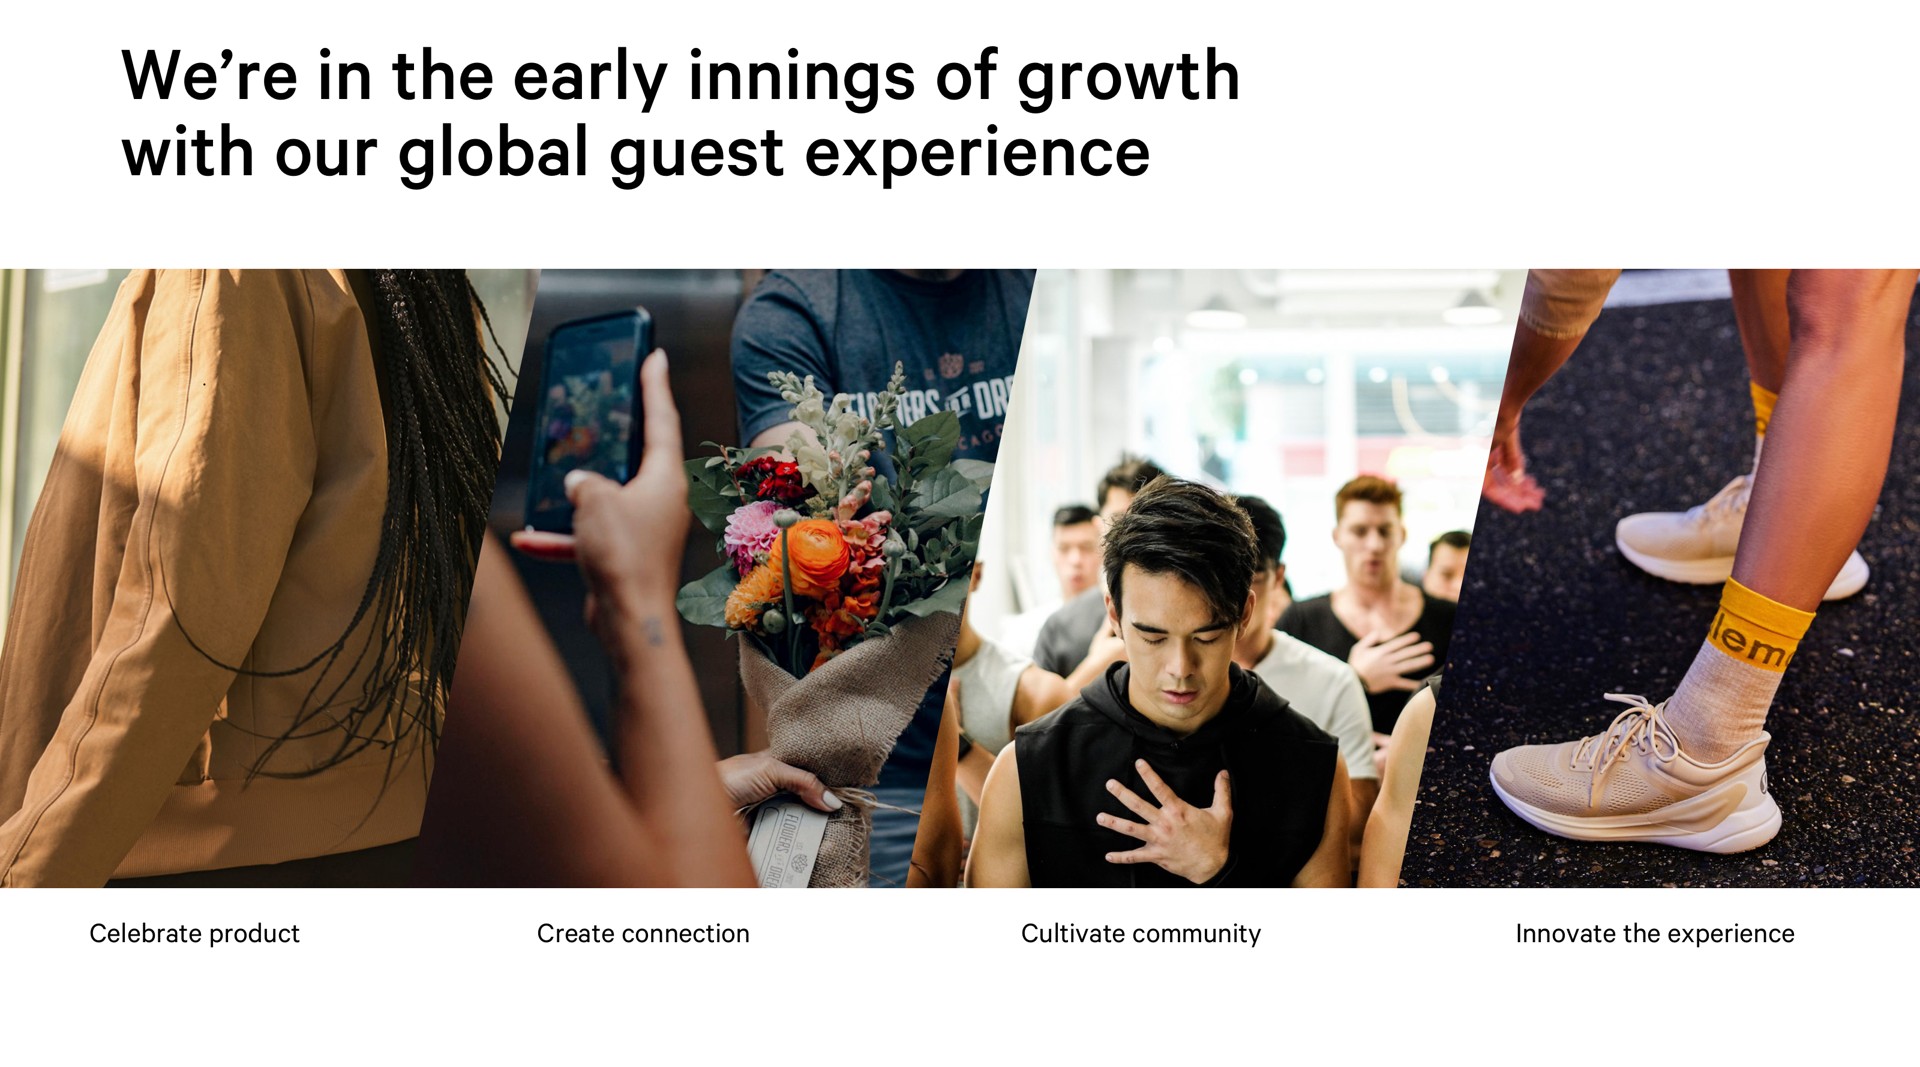 we in the early innings of growth with our global guest experience | Lululemon